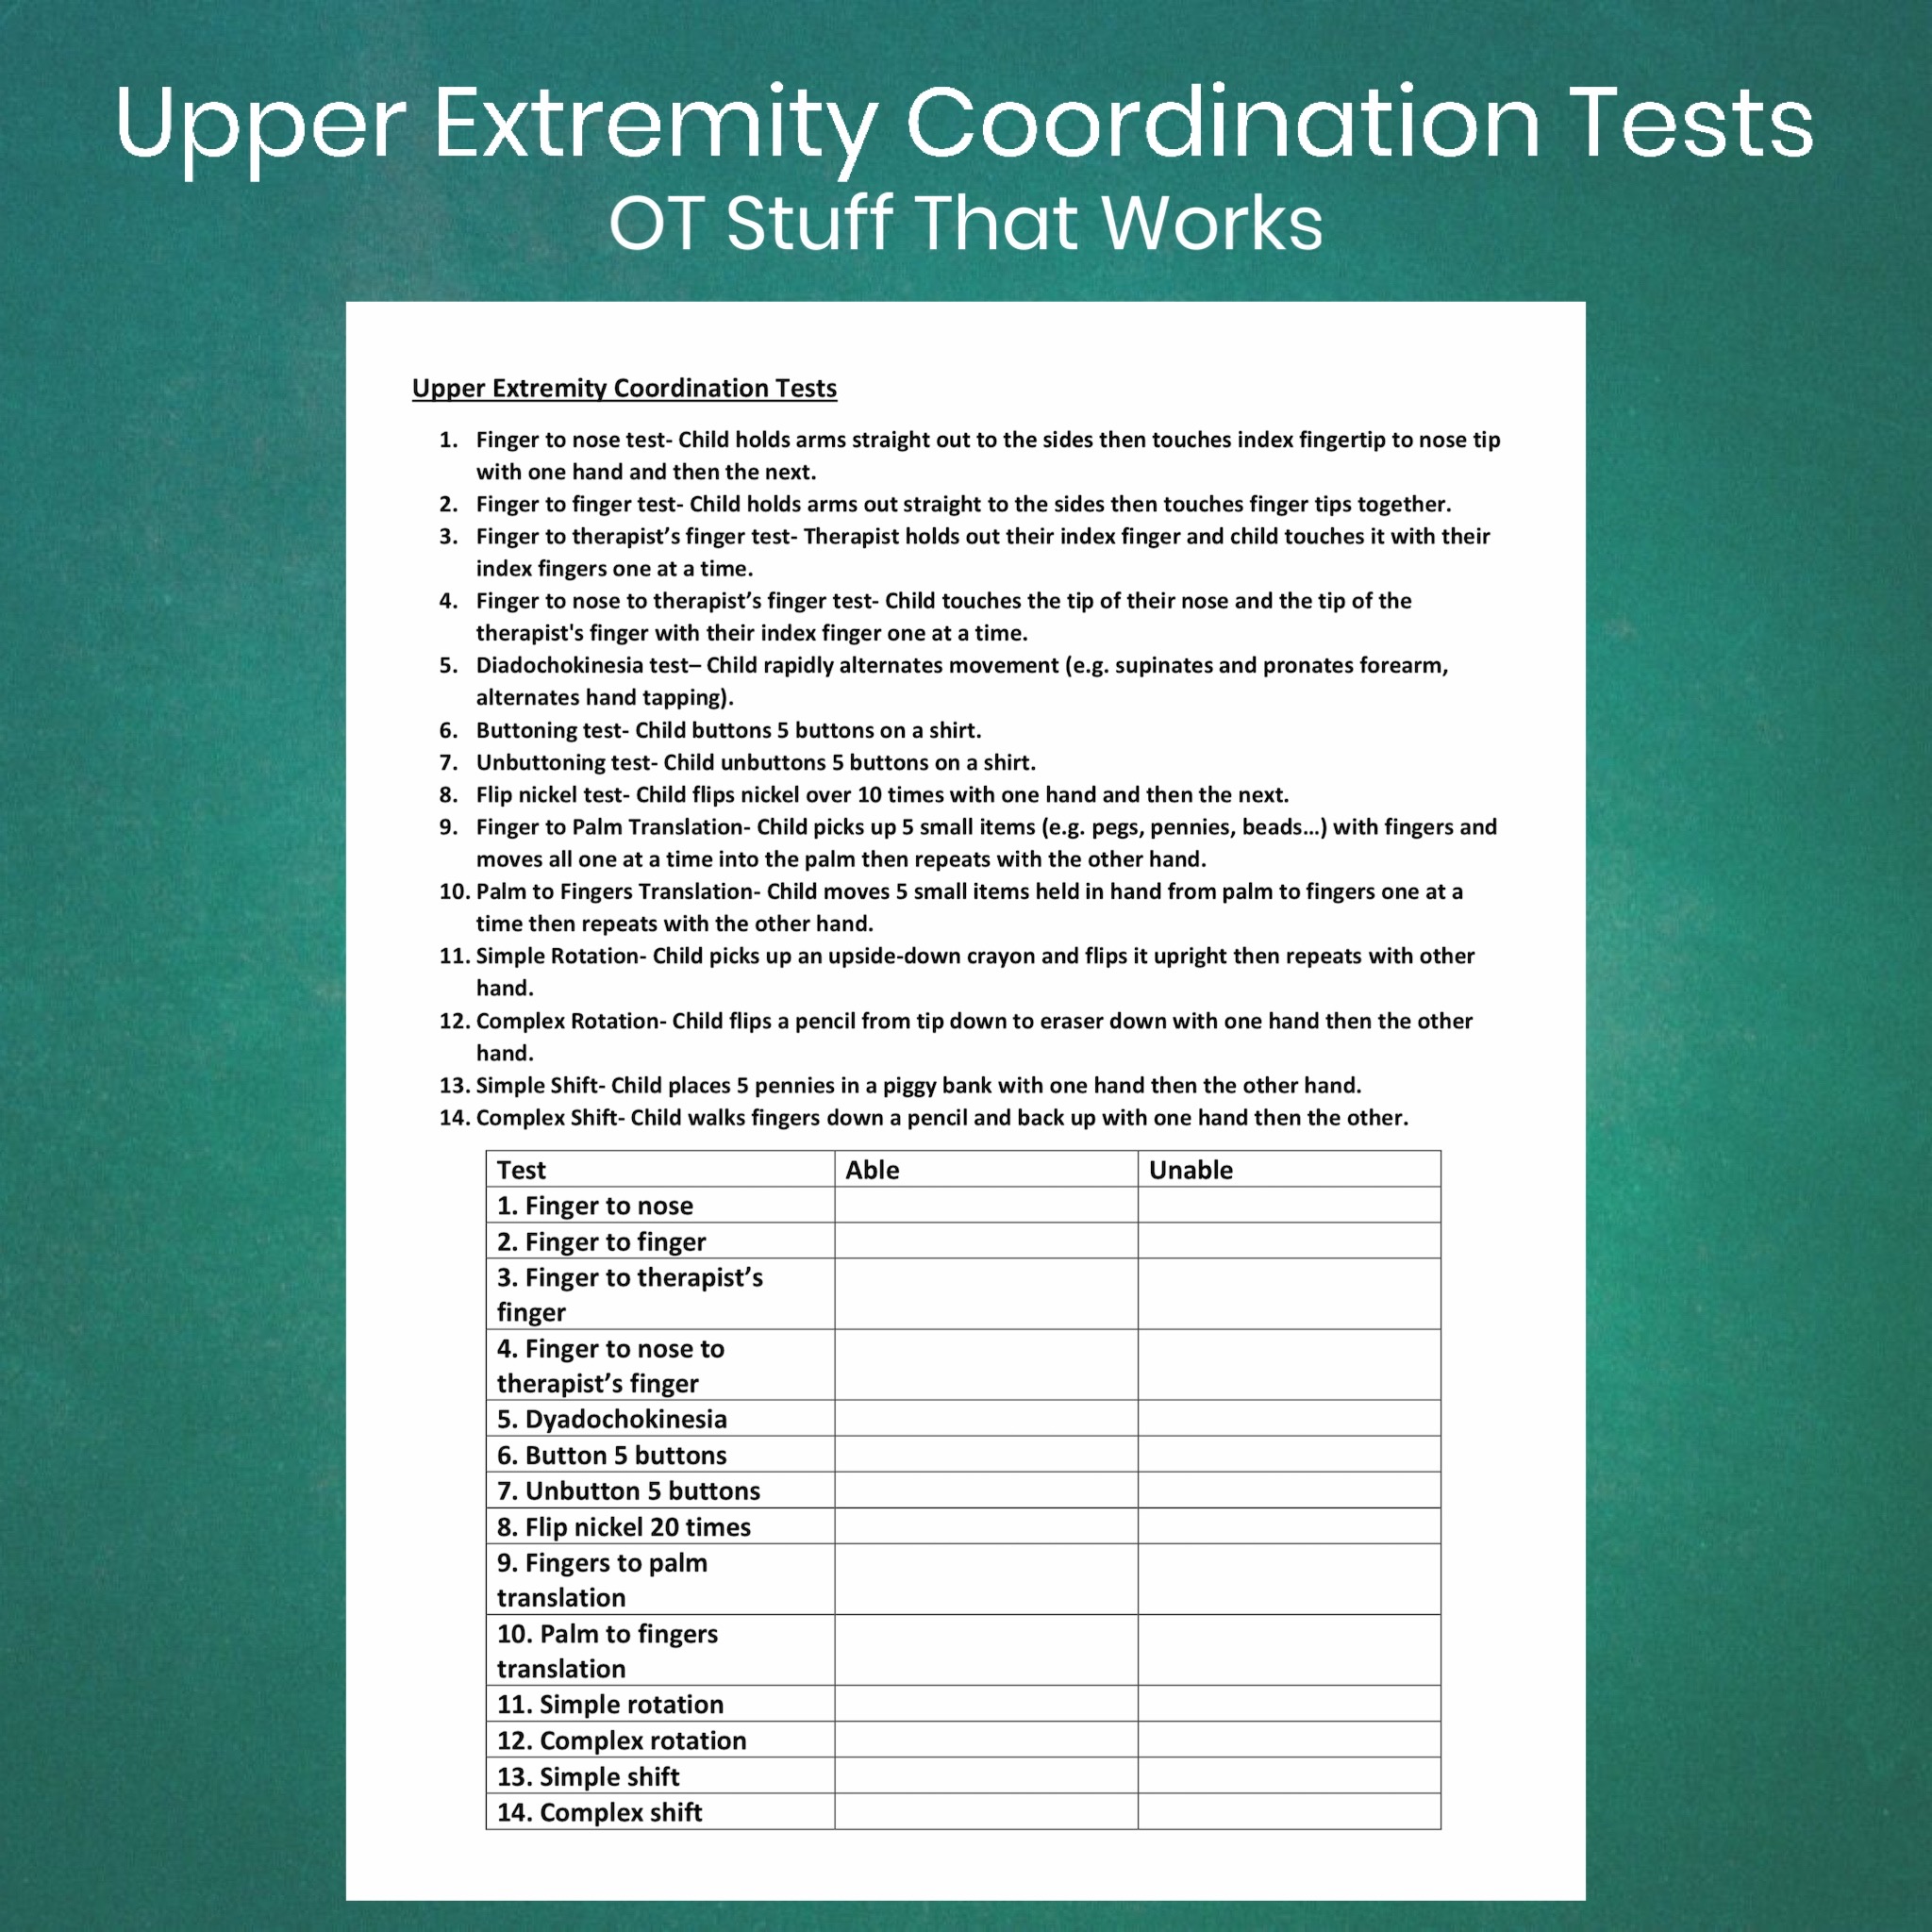 Uppper Extremity Coordination Tests's featured image